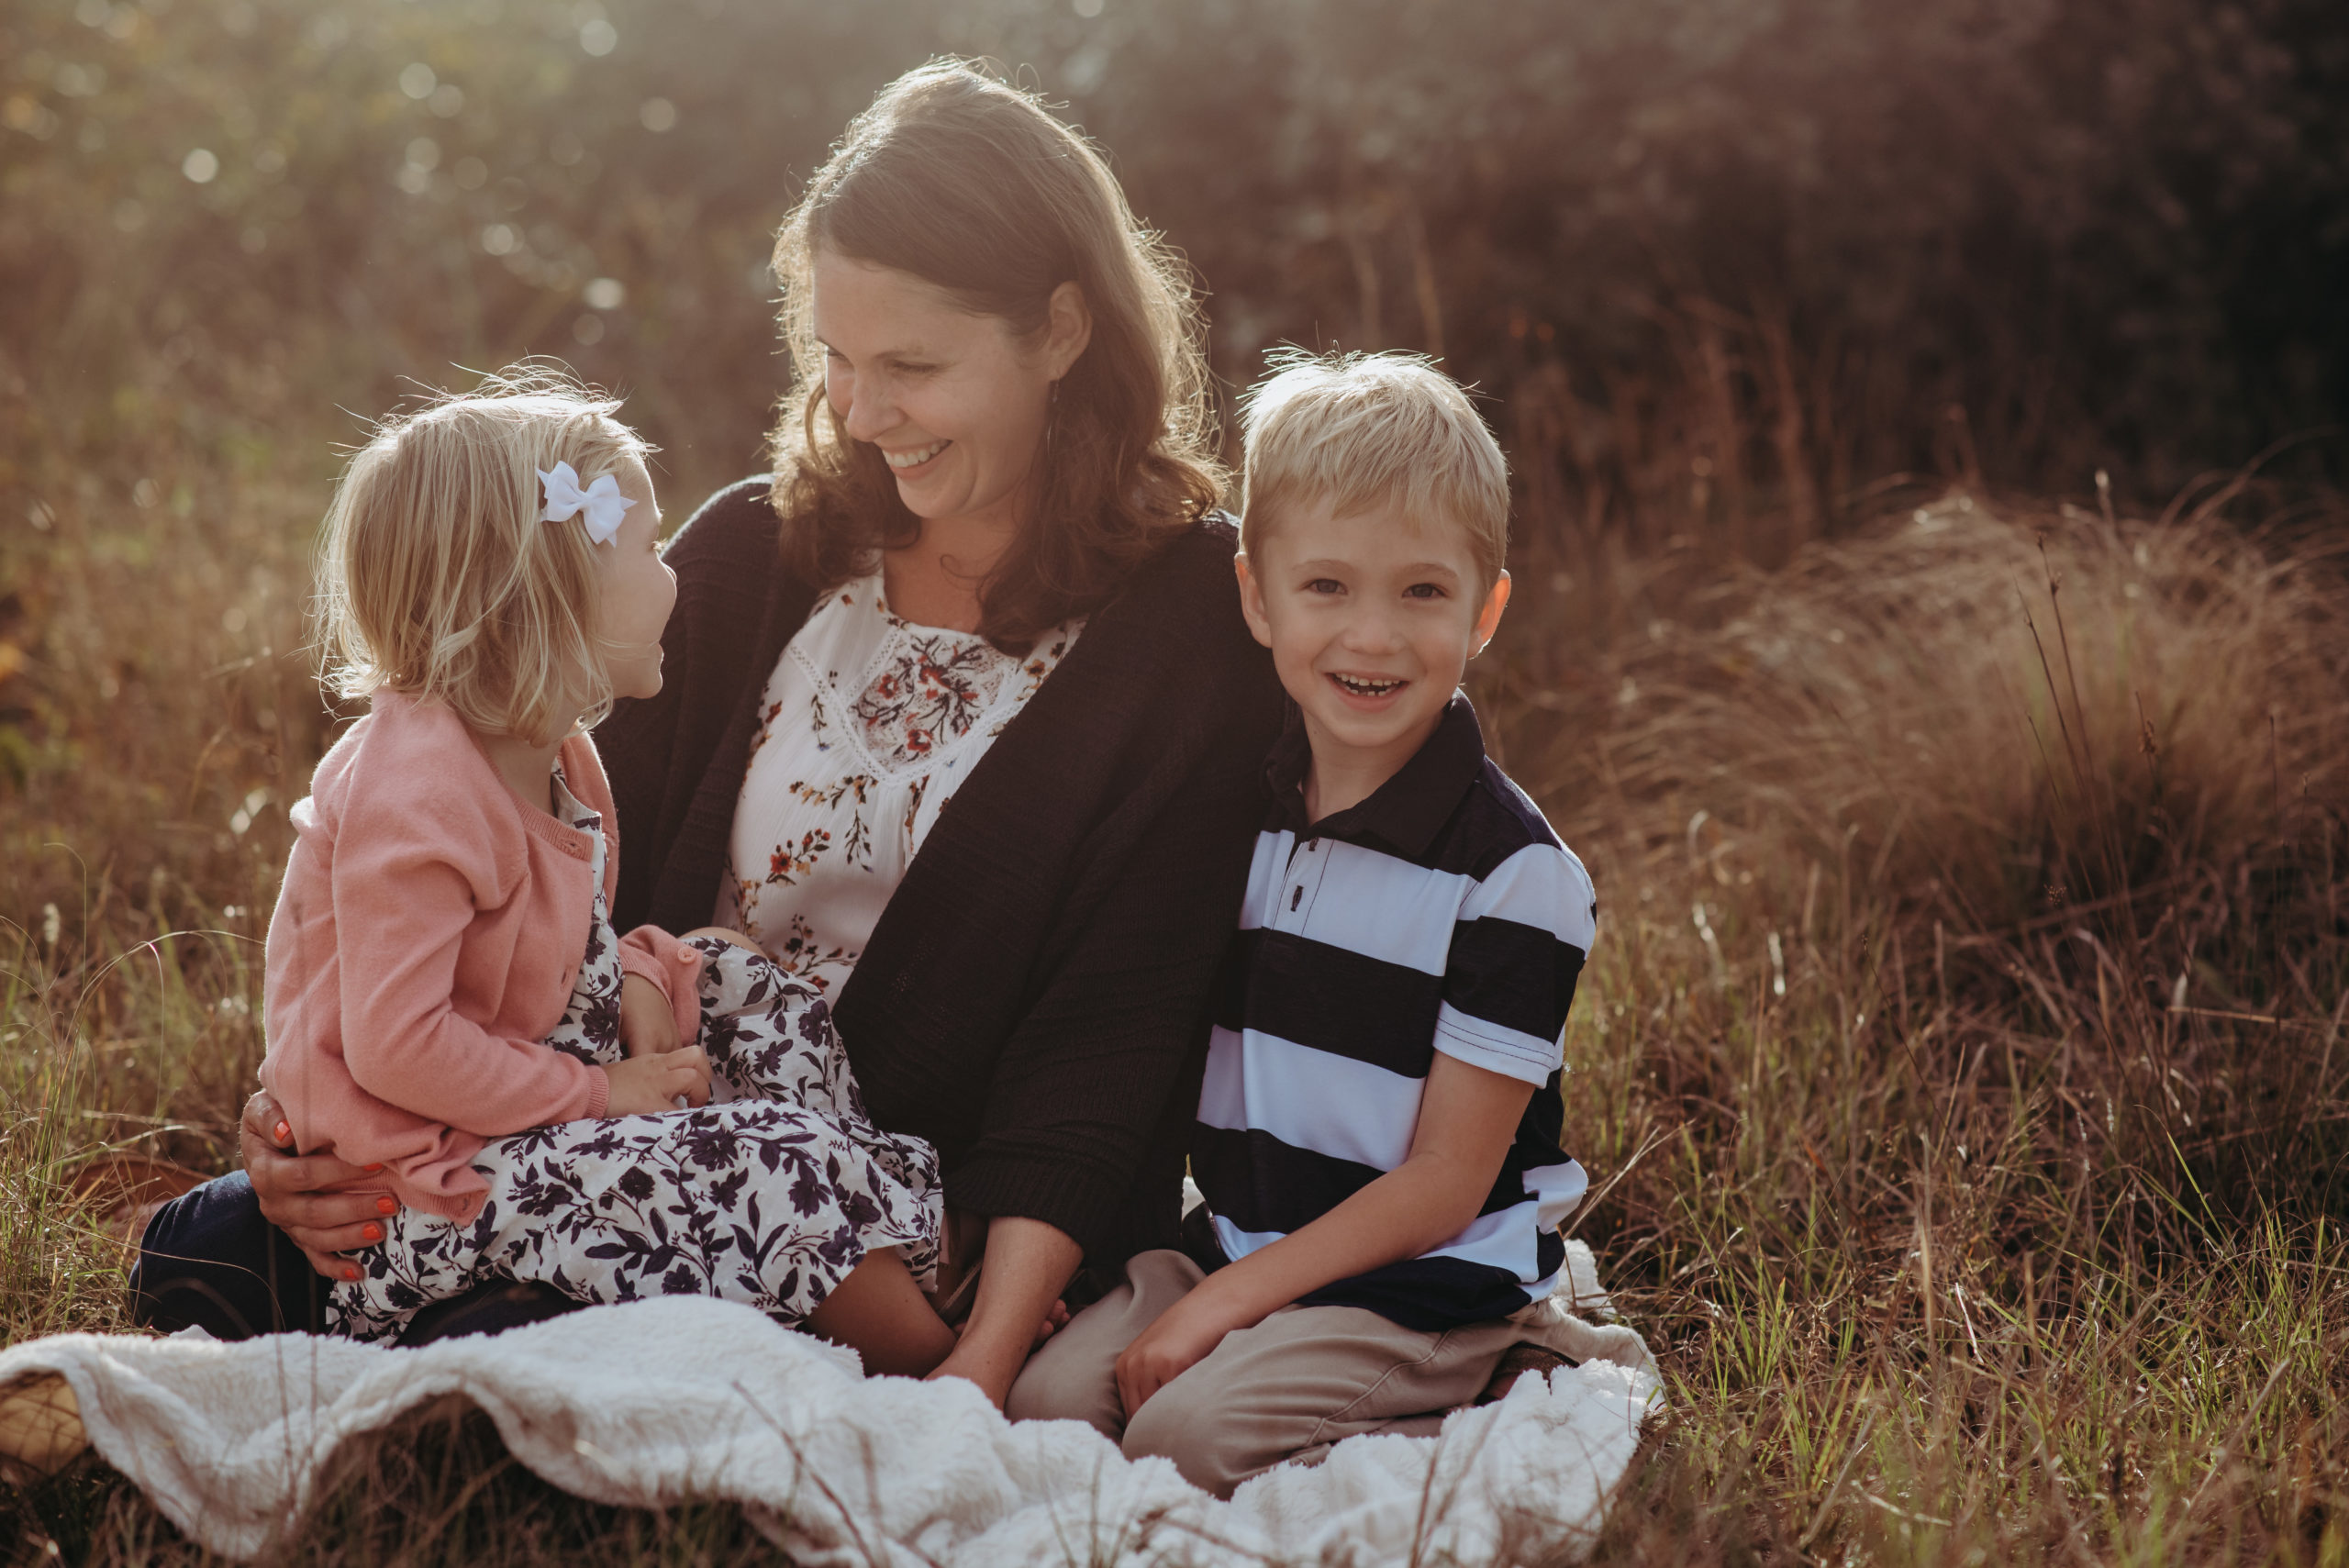 Outer Banks fun and natural family photographer Laura Walter